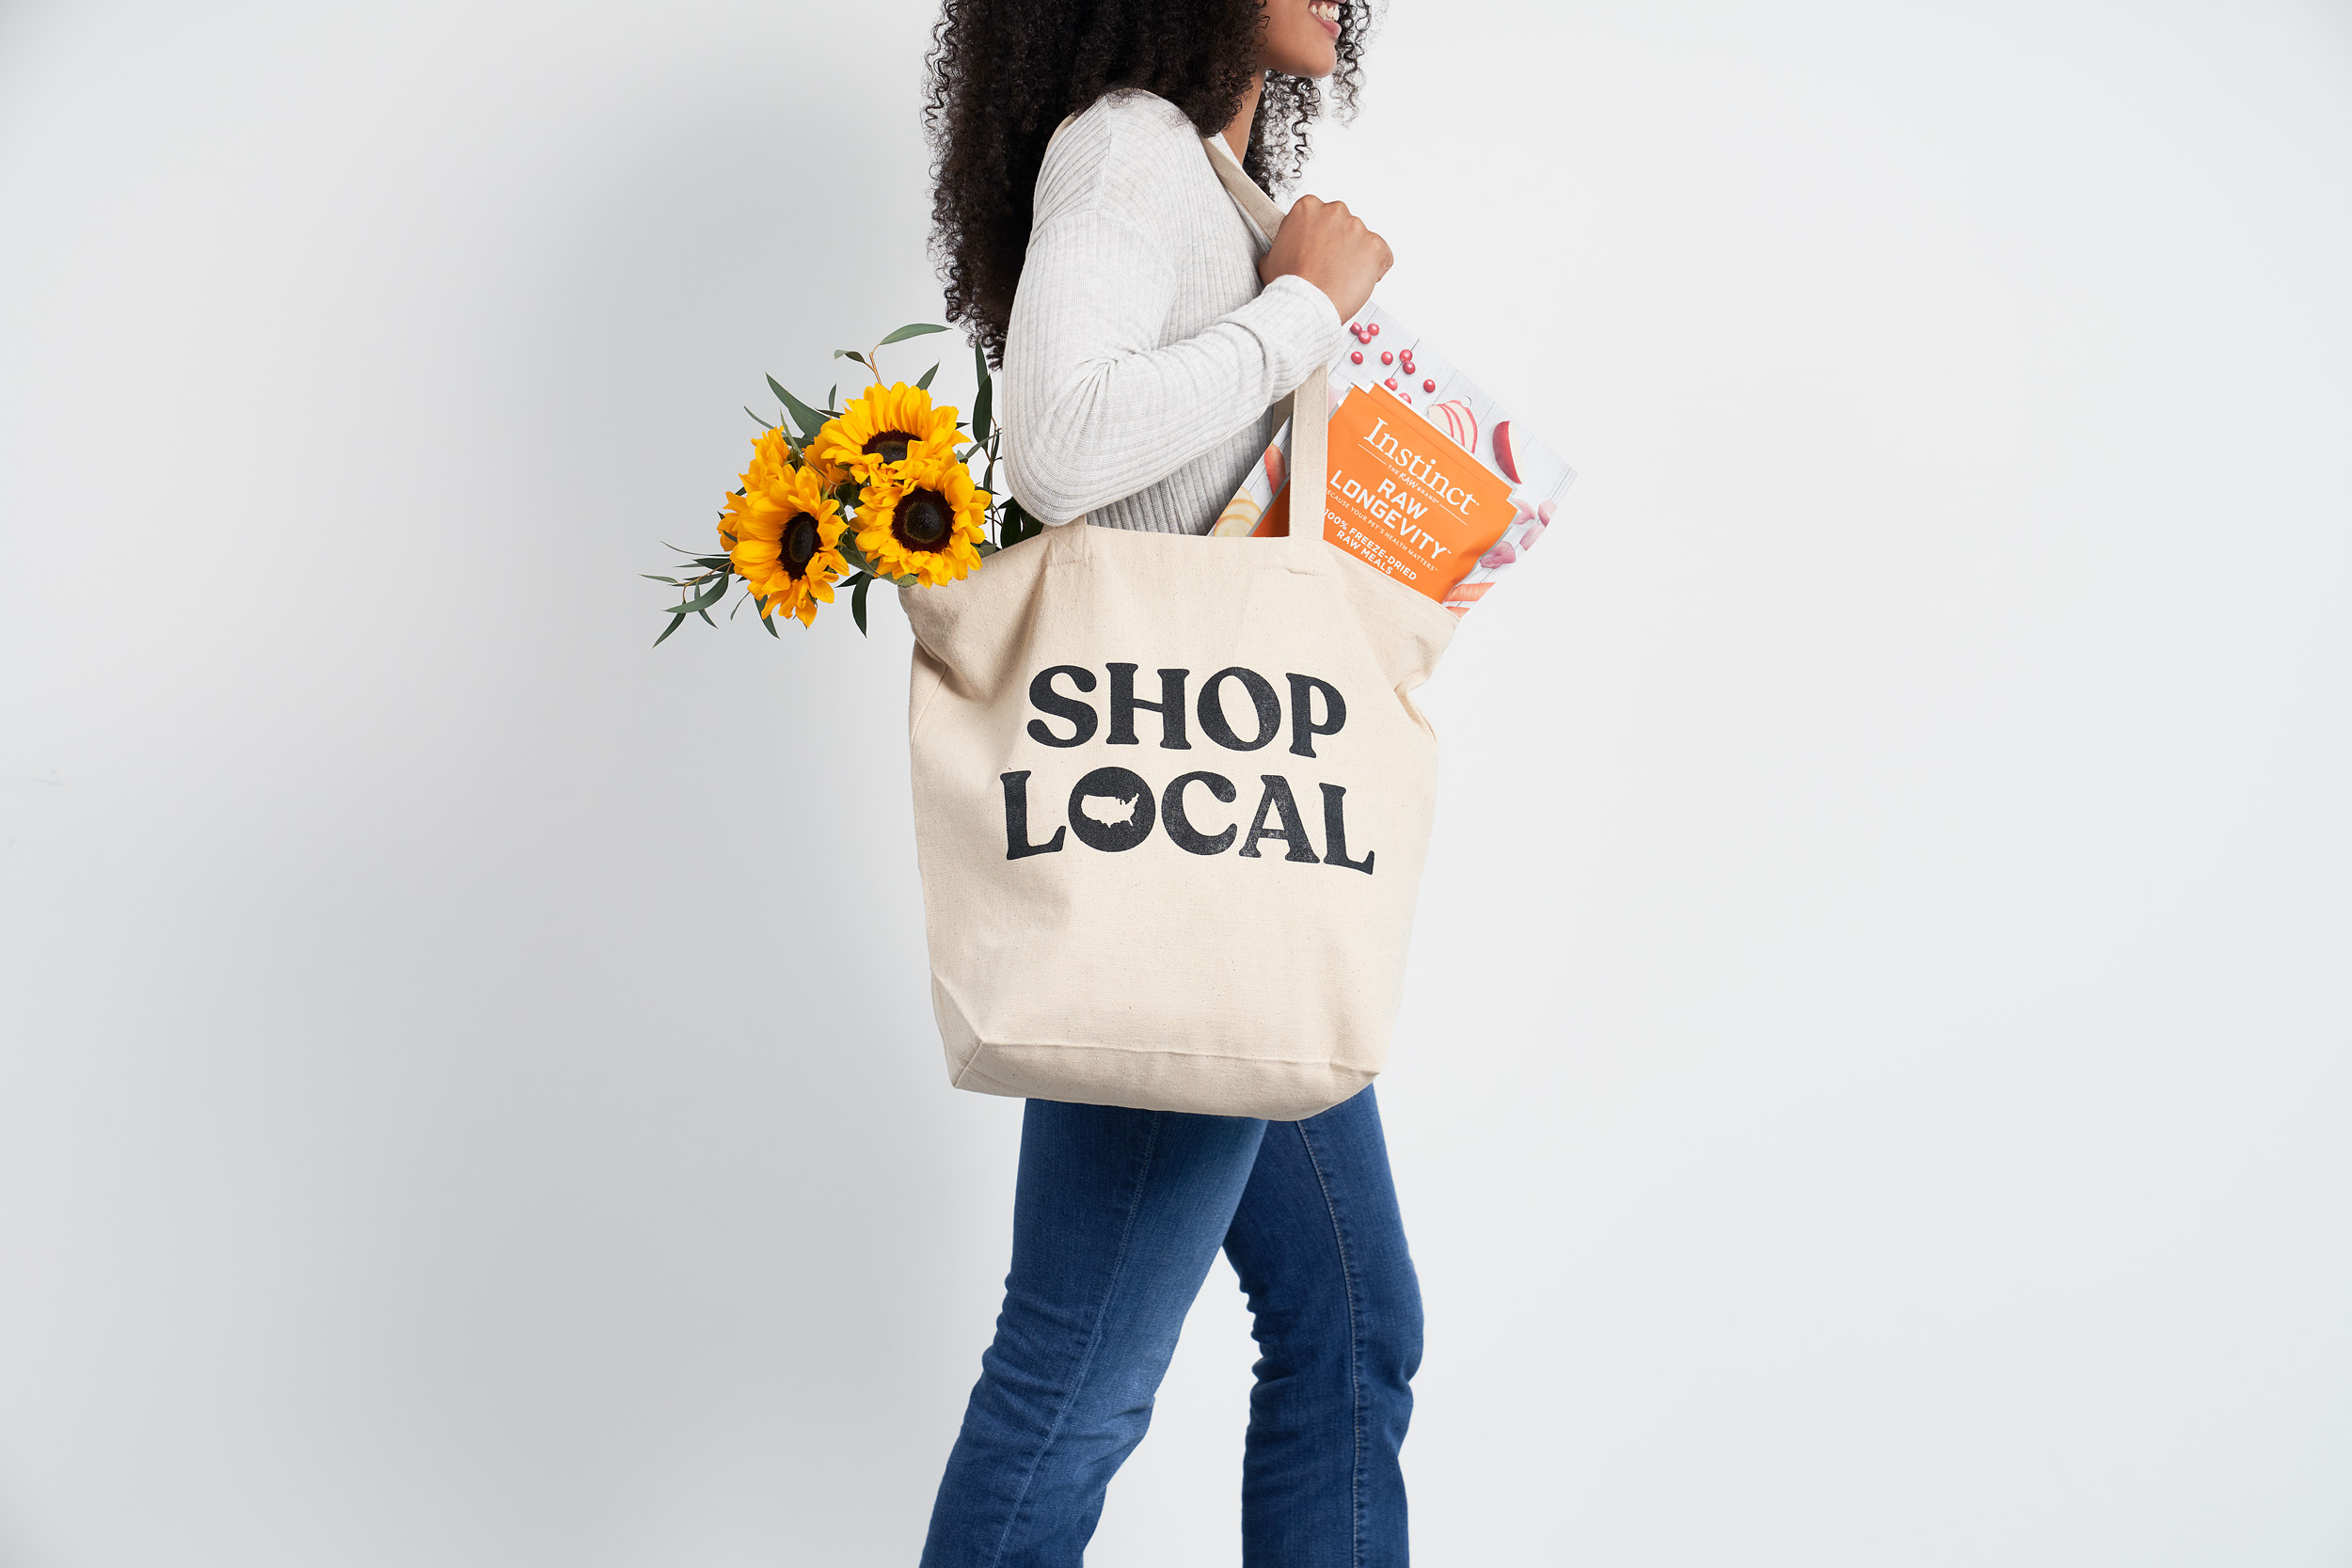 20210604_NaturesVariety_Model_ToteBag_BagShowing_Caitlyn_2089f-1